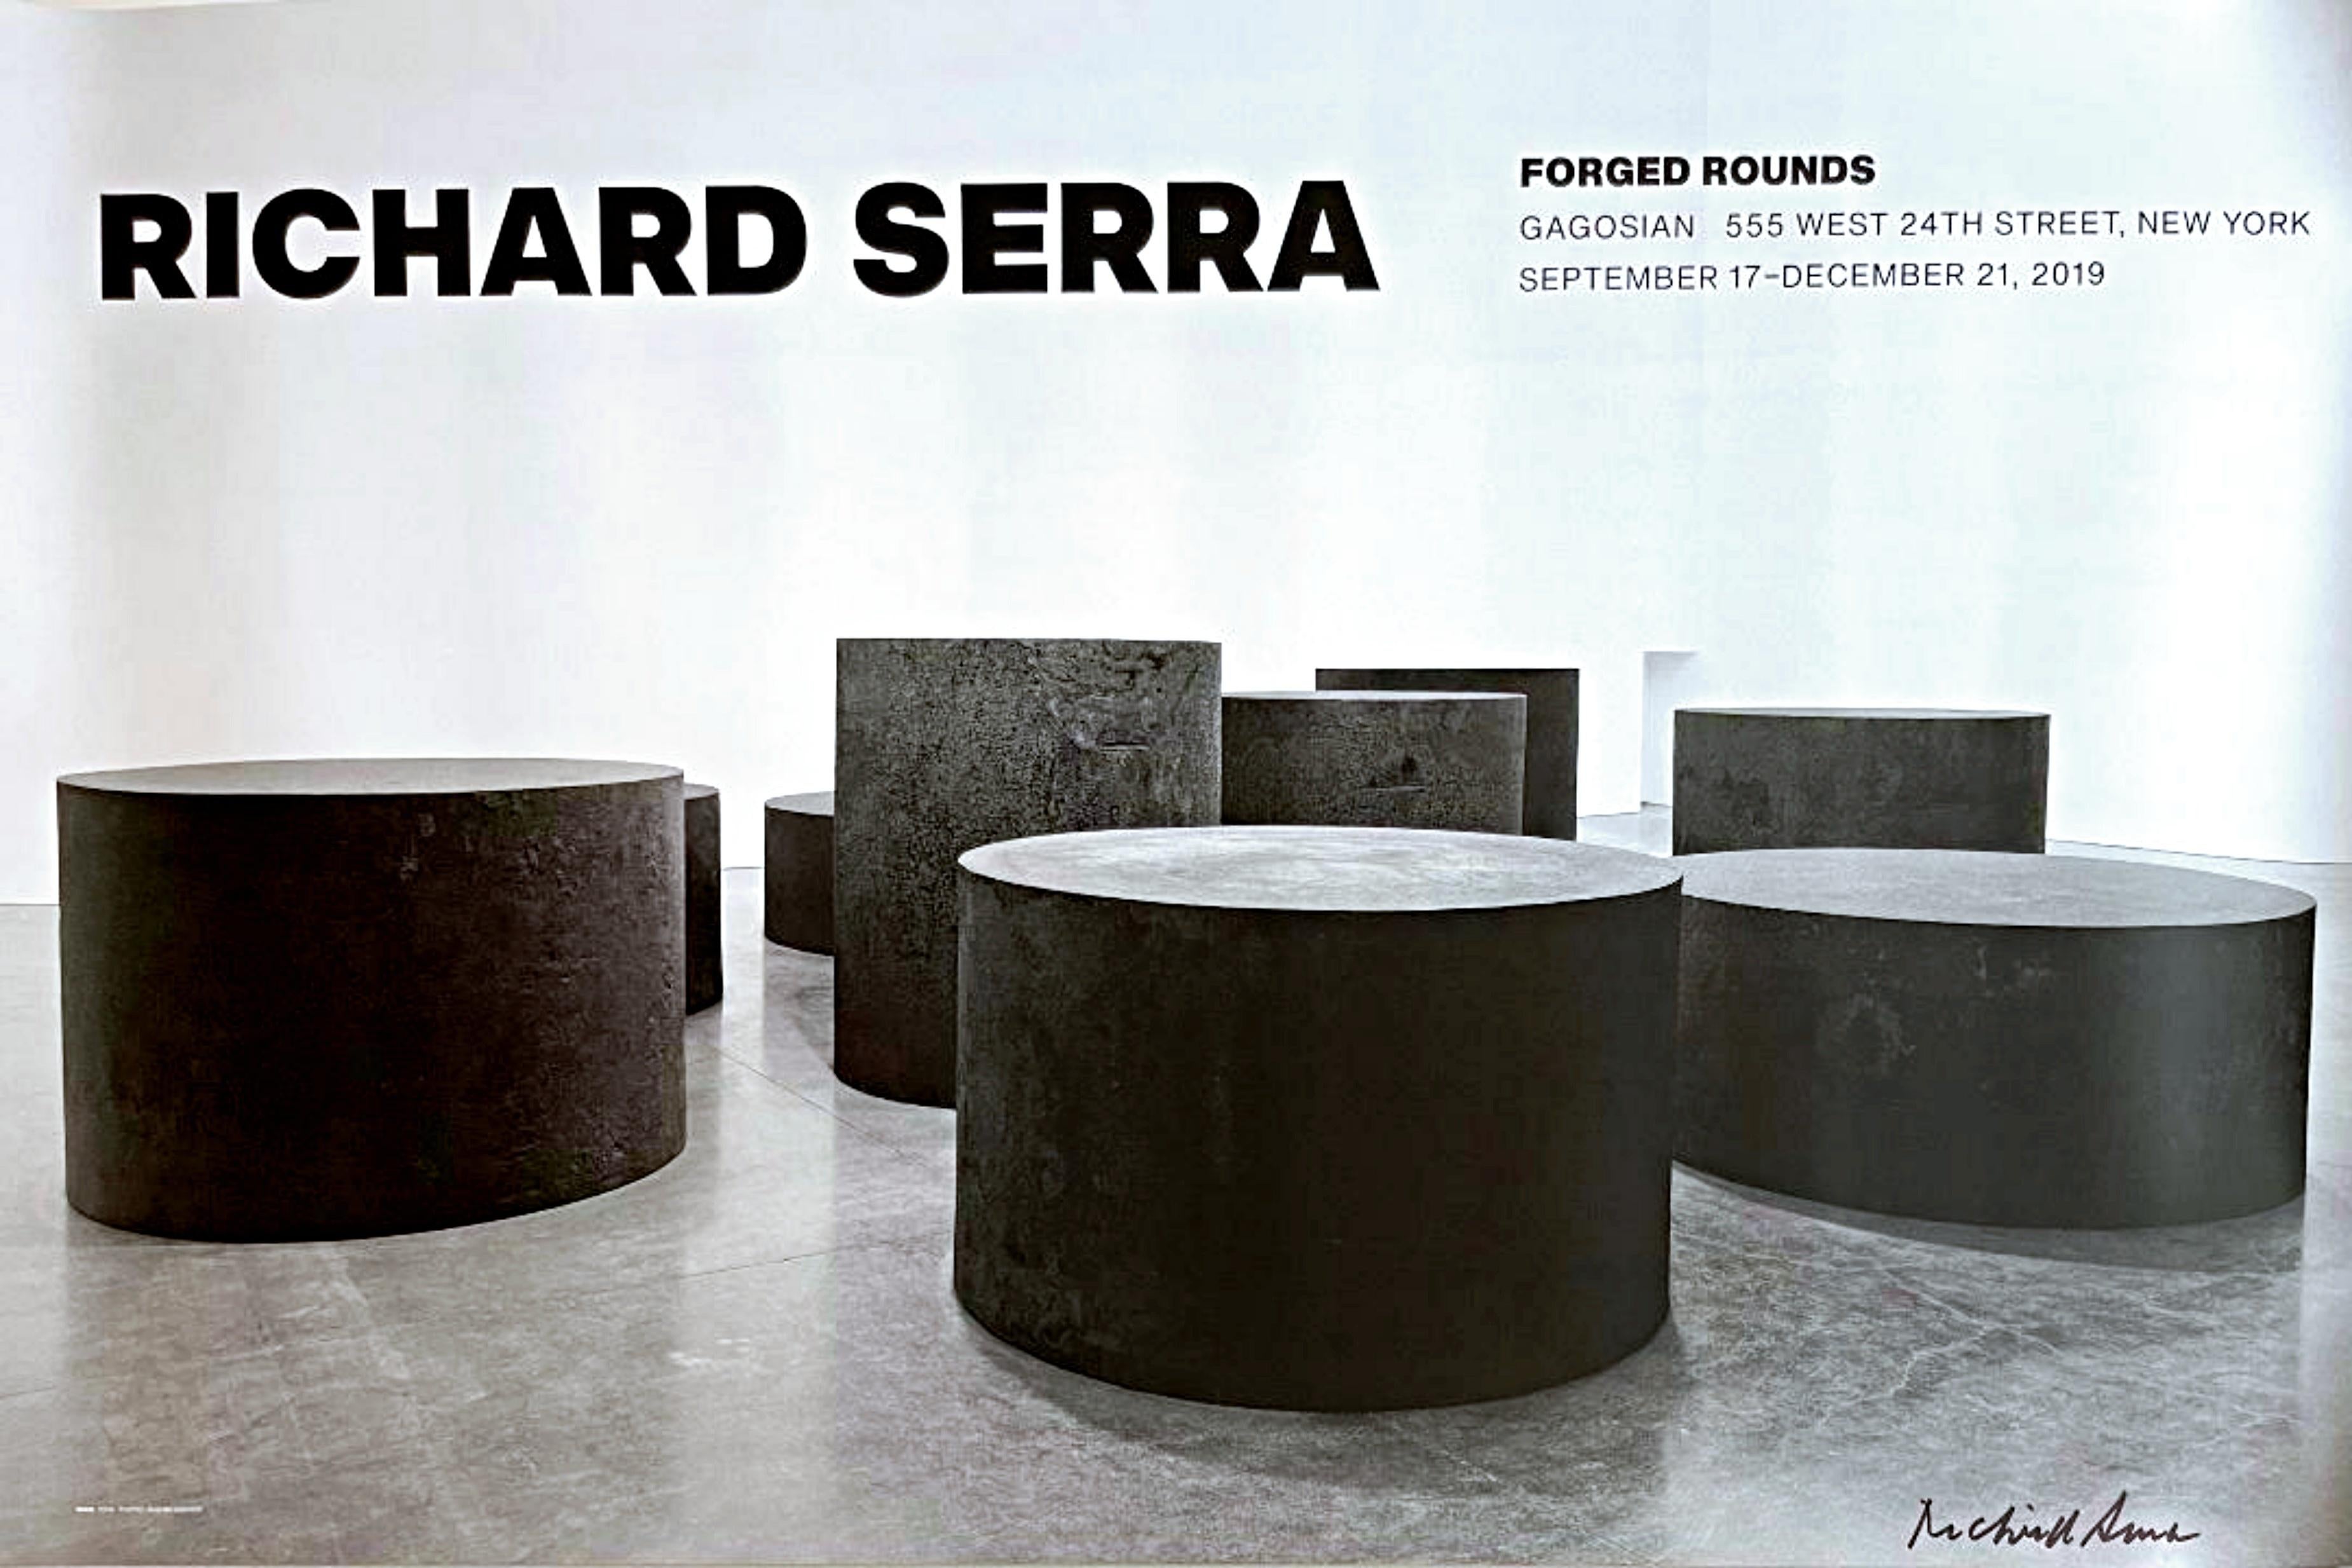 Forged Rounds, Gagosian gallery exhibition poster, Hand signed by Richard Serra 